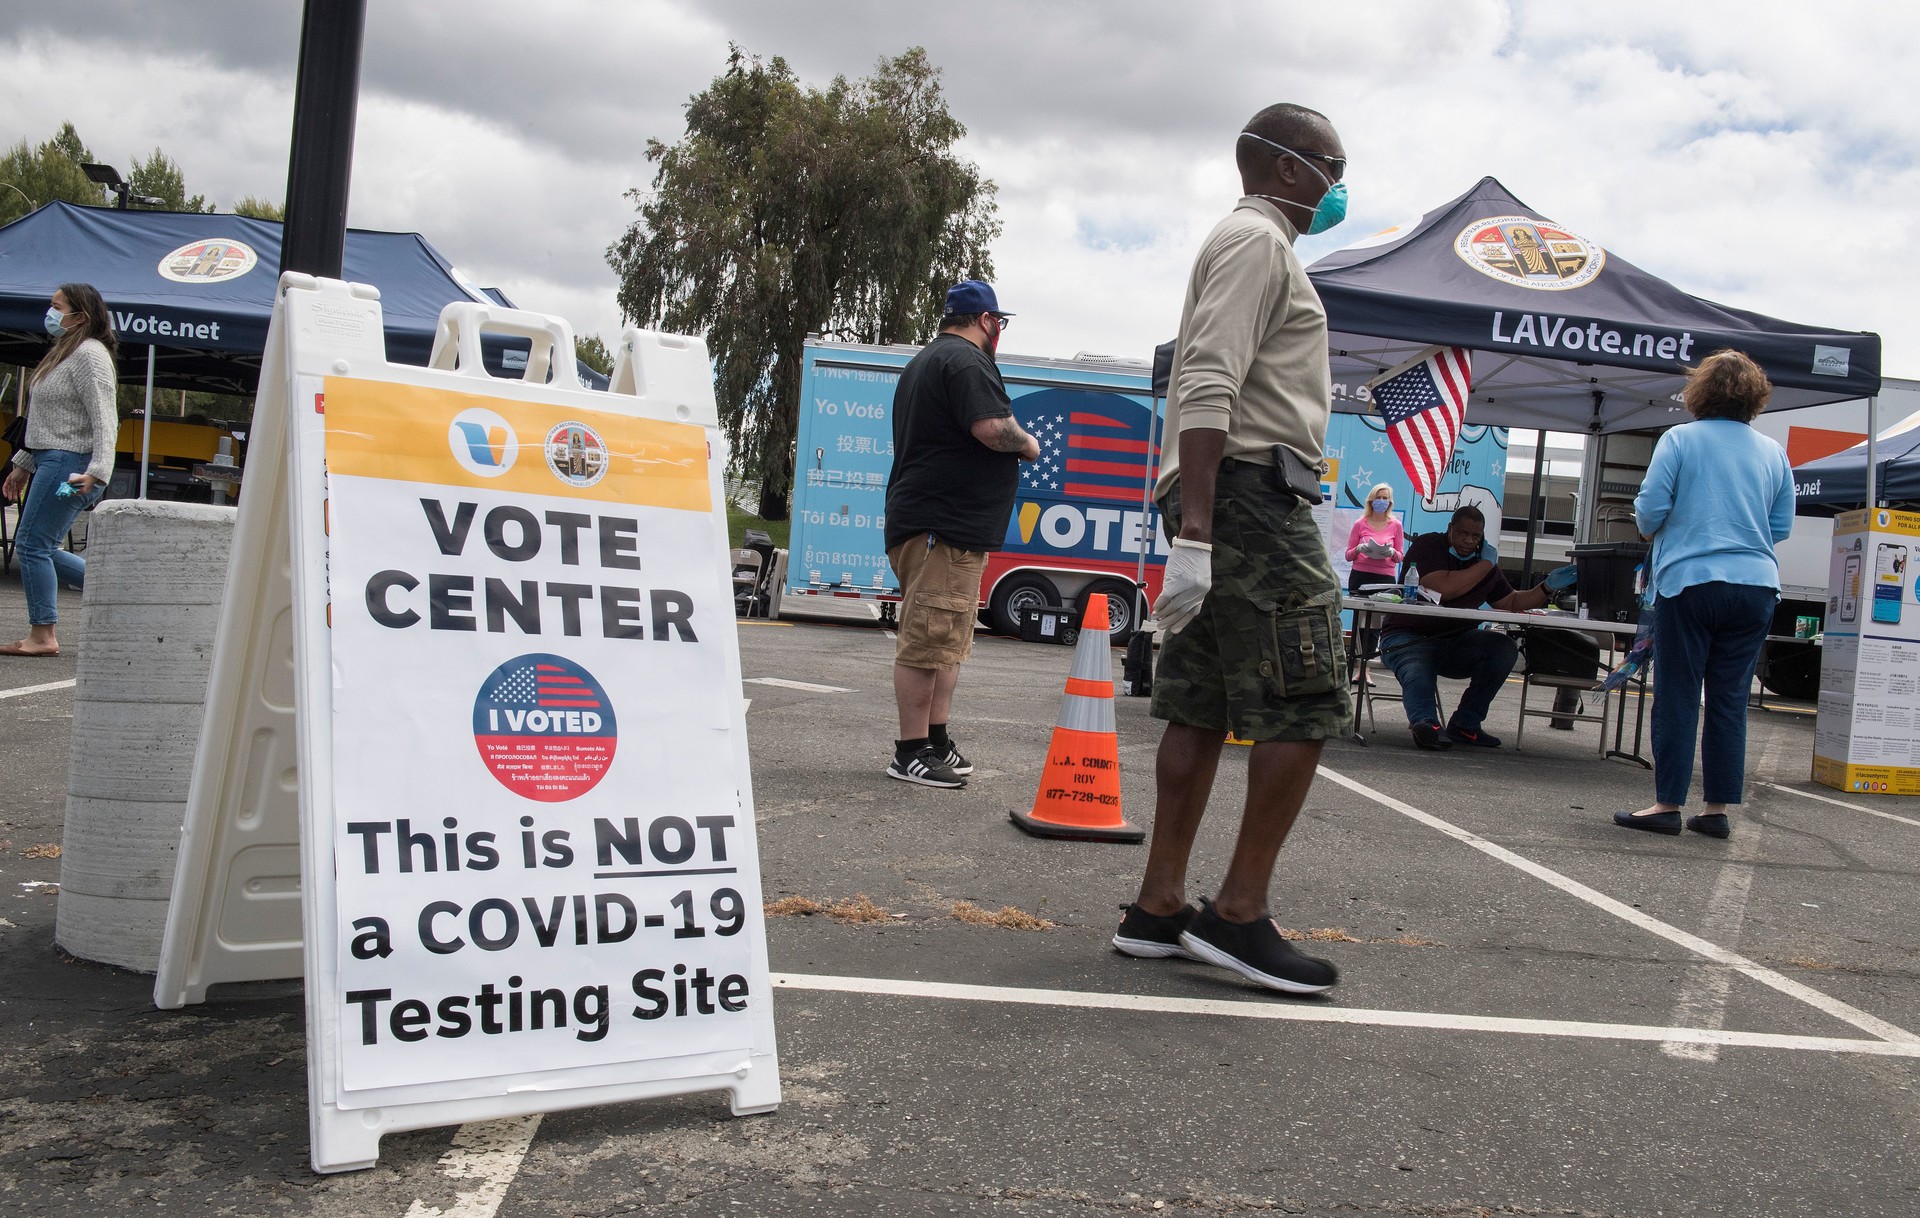 People wait to vote at a voting station for the special election between Democratic state assemblywoman Christy Smith and Republican businessman and ex-Navy pilot Mike Garcia to replace former Democratic Congresswoman Katie Hill in the state's 25th Congressional District, in Santa Clarita on May 12, 2020.